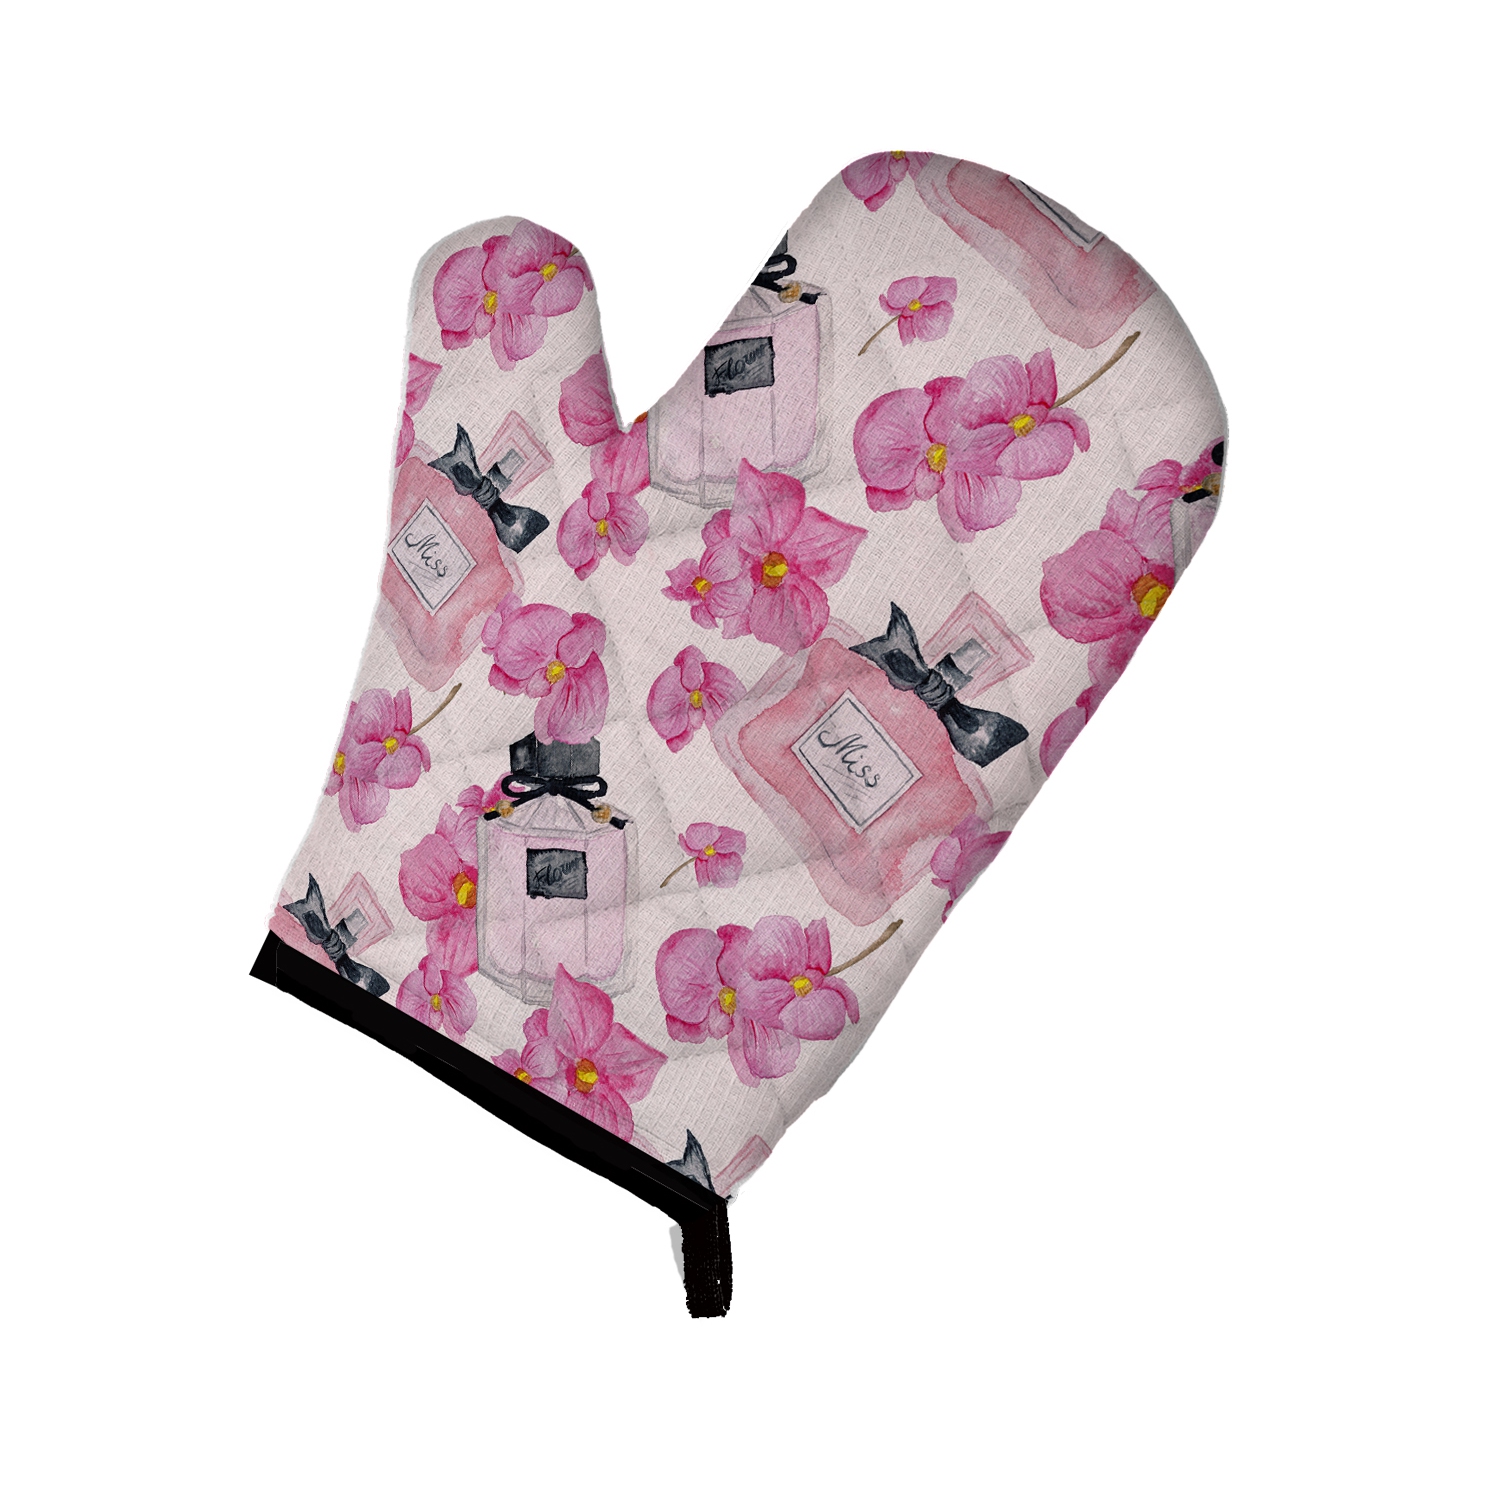 Caroline's Treasures BB7510OVMT Watercolor Pink Flowers and Perfume Oven Mitt, Large, multicolor